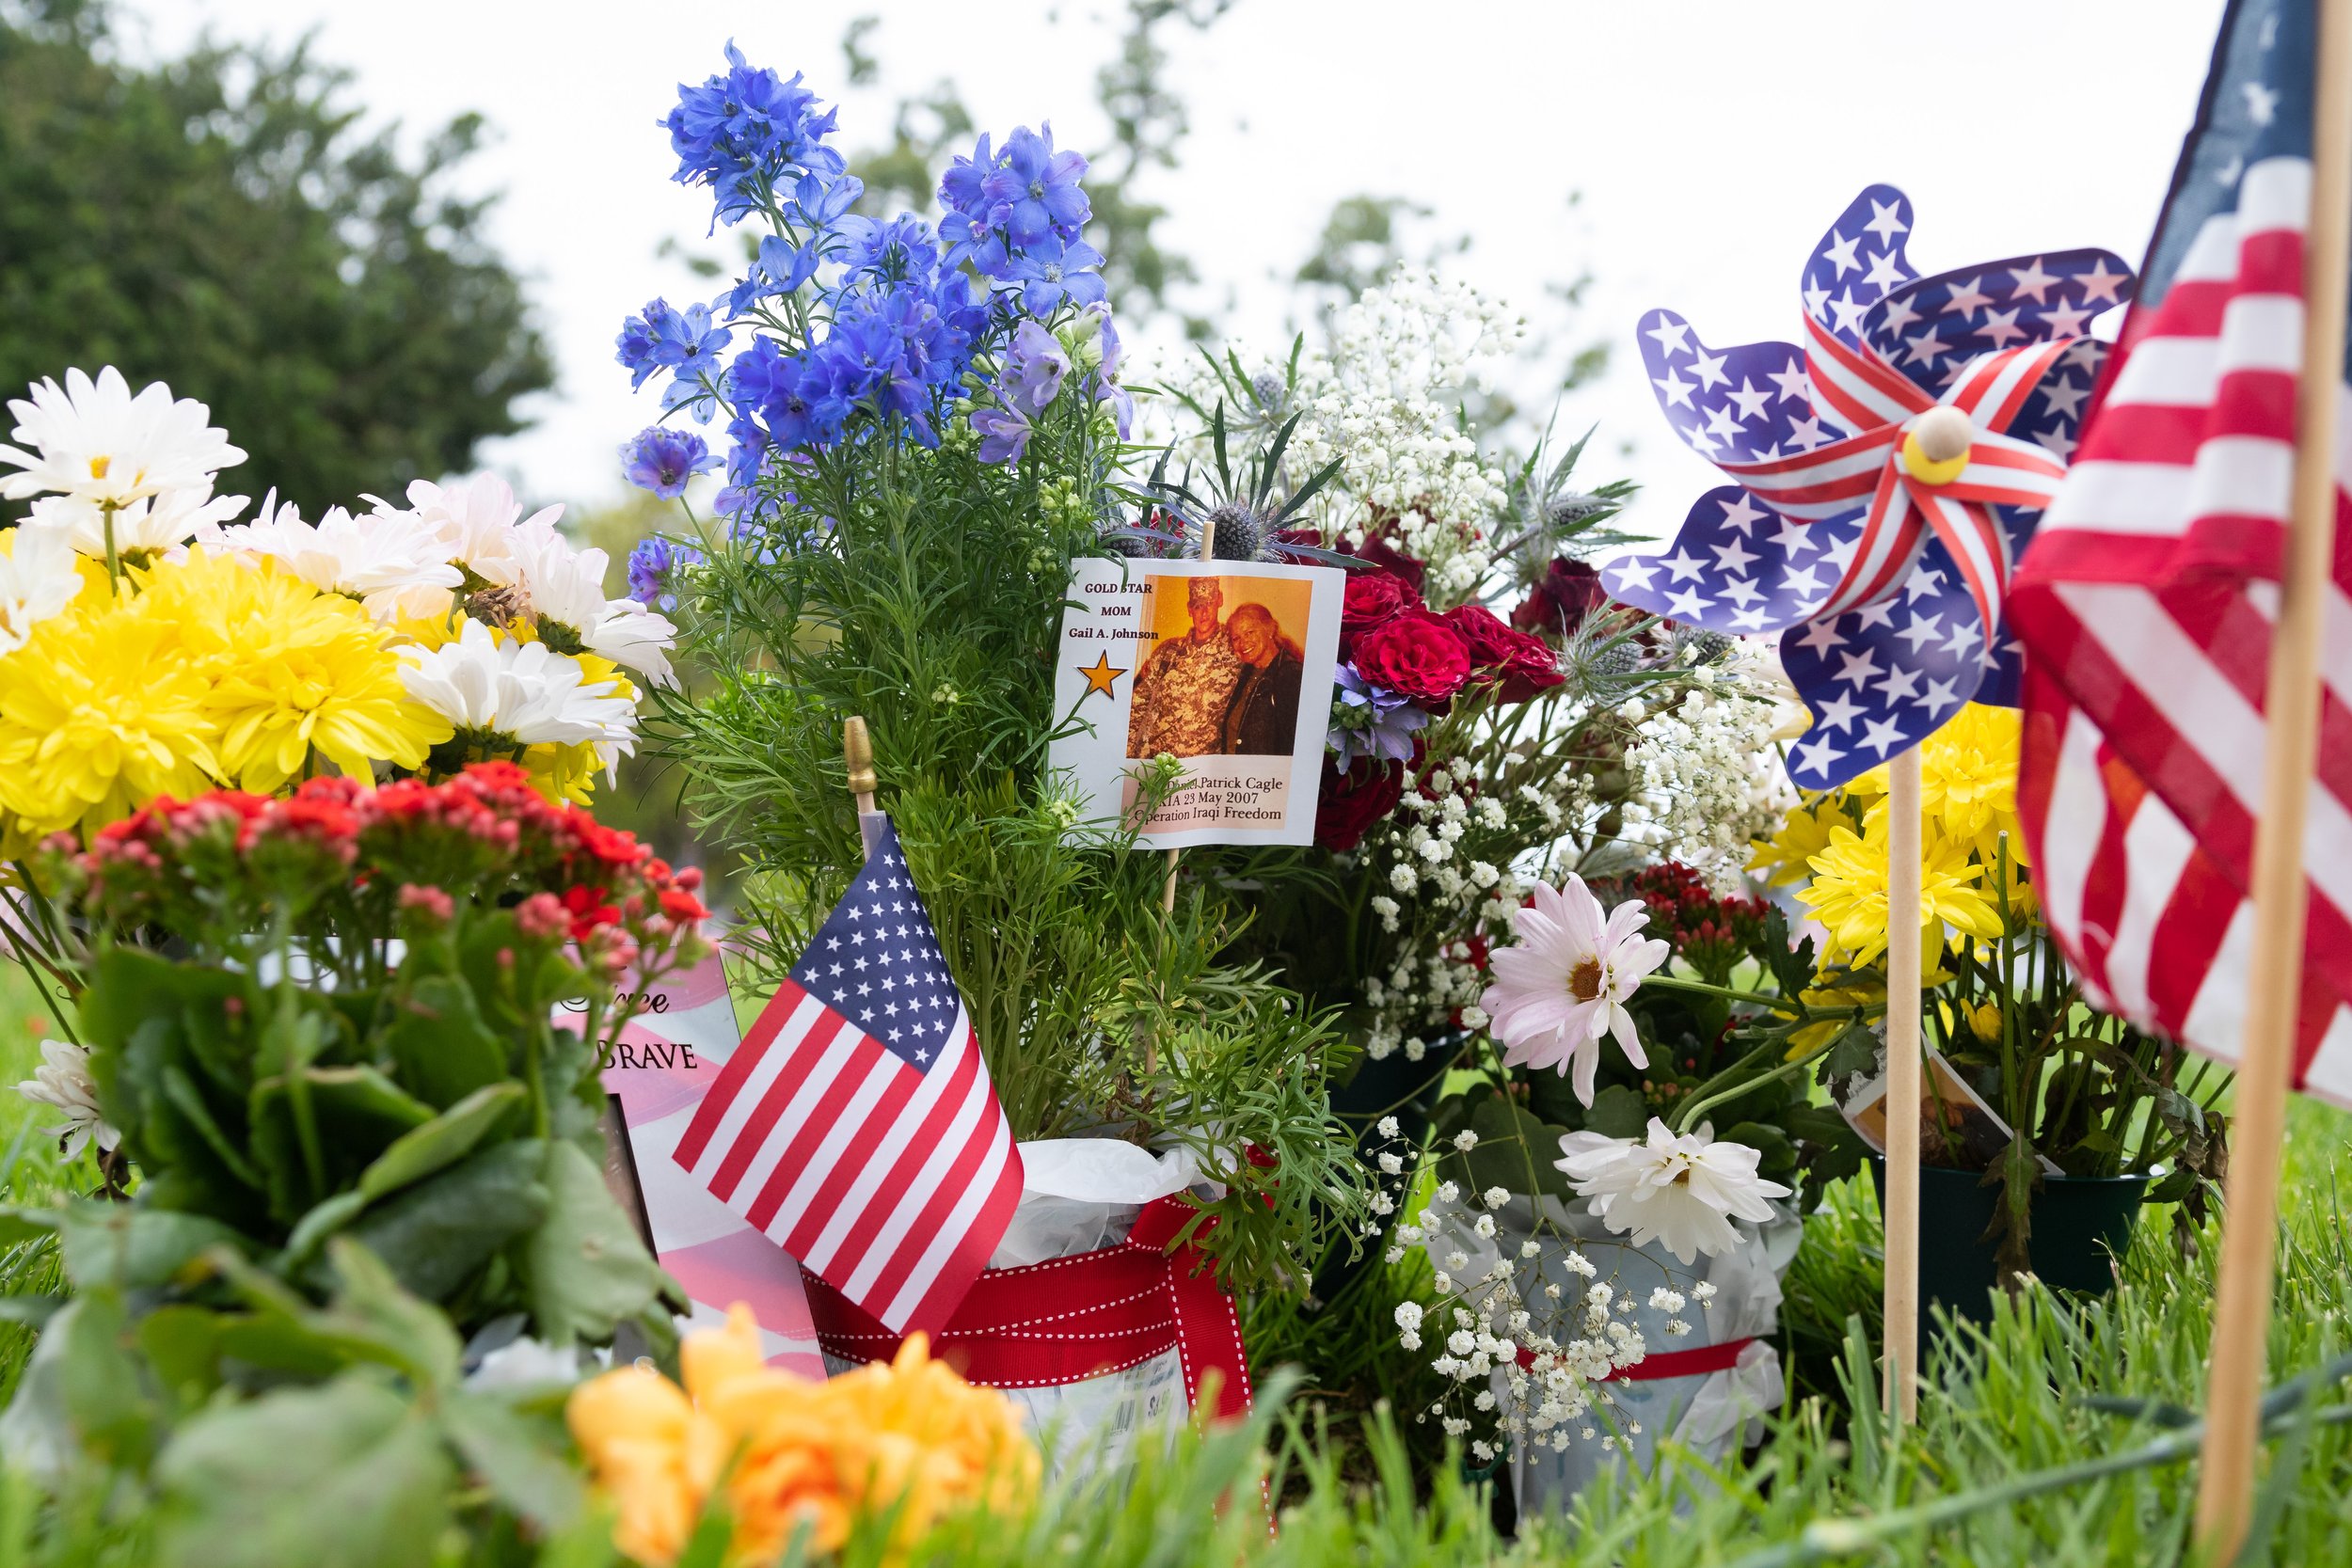  The grave of Daniel Patrick Cagle adorned with flowers from his family on Memorial Day at Los Angeles National Cemetery in Los Angeles, Calif., on Monday, May 29, 2023. Cagle was killed in action on May 23, 2007, during Operation Iraqi Freedom when 